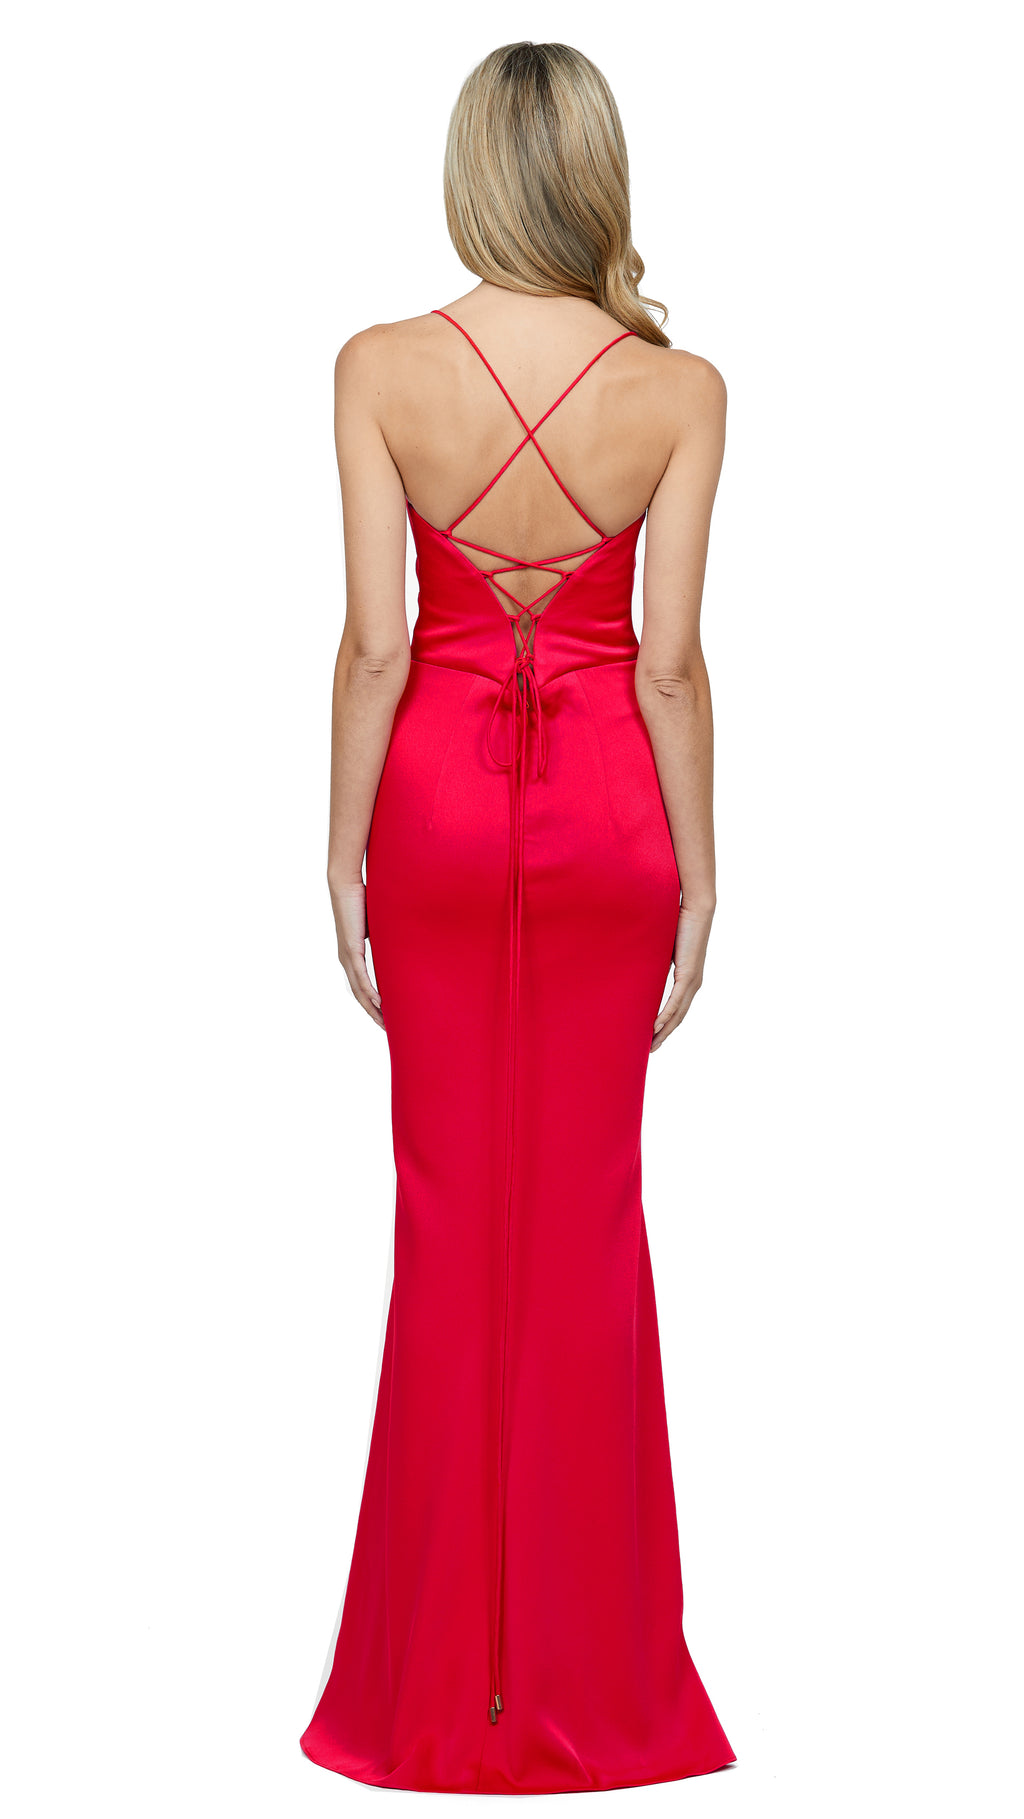 Stephanie Cowl Satin Gown in Red  BACK